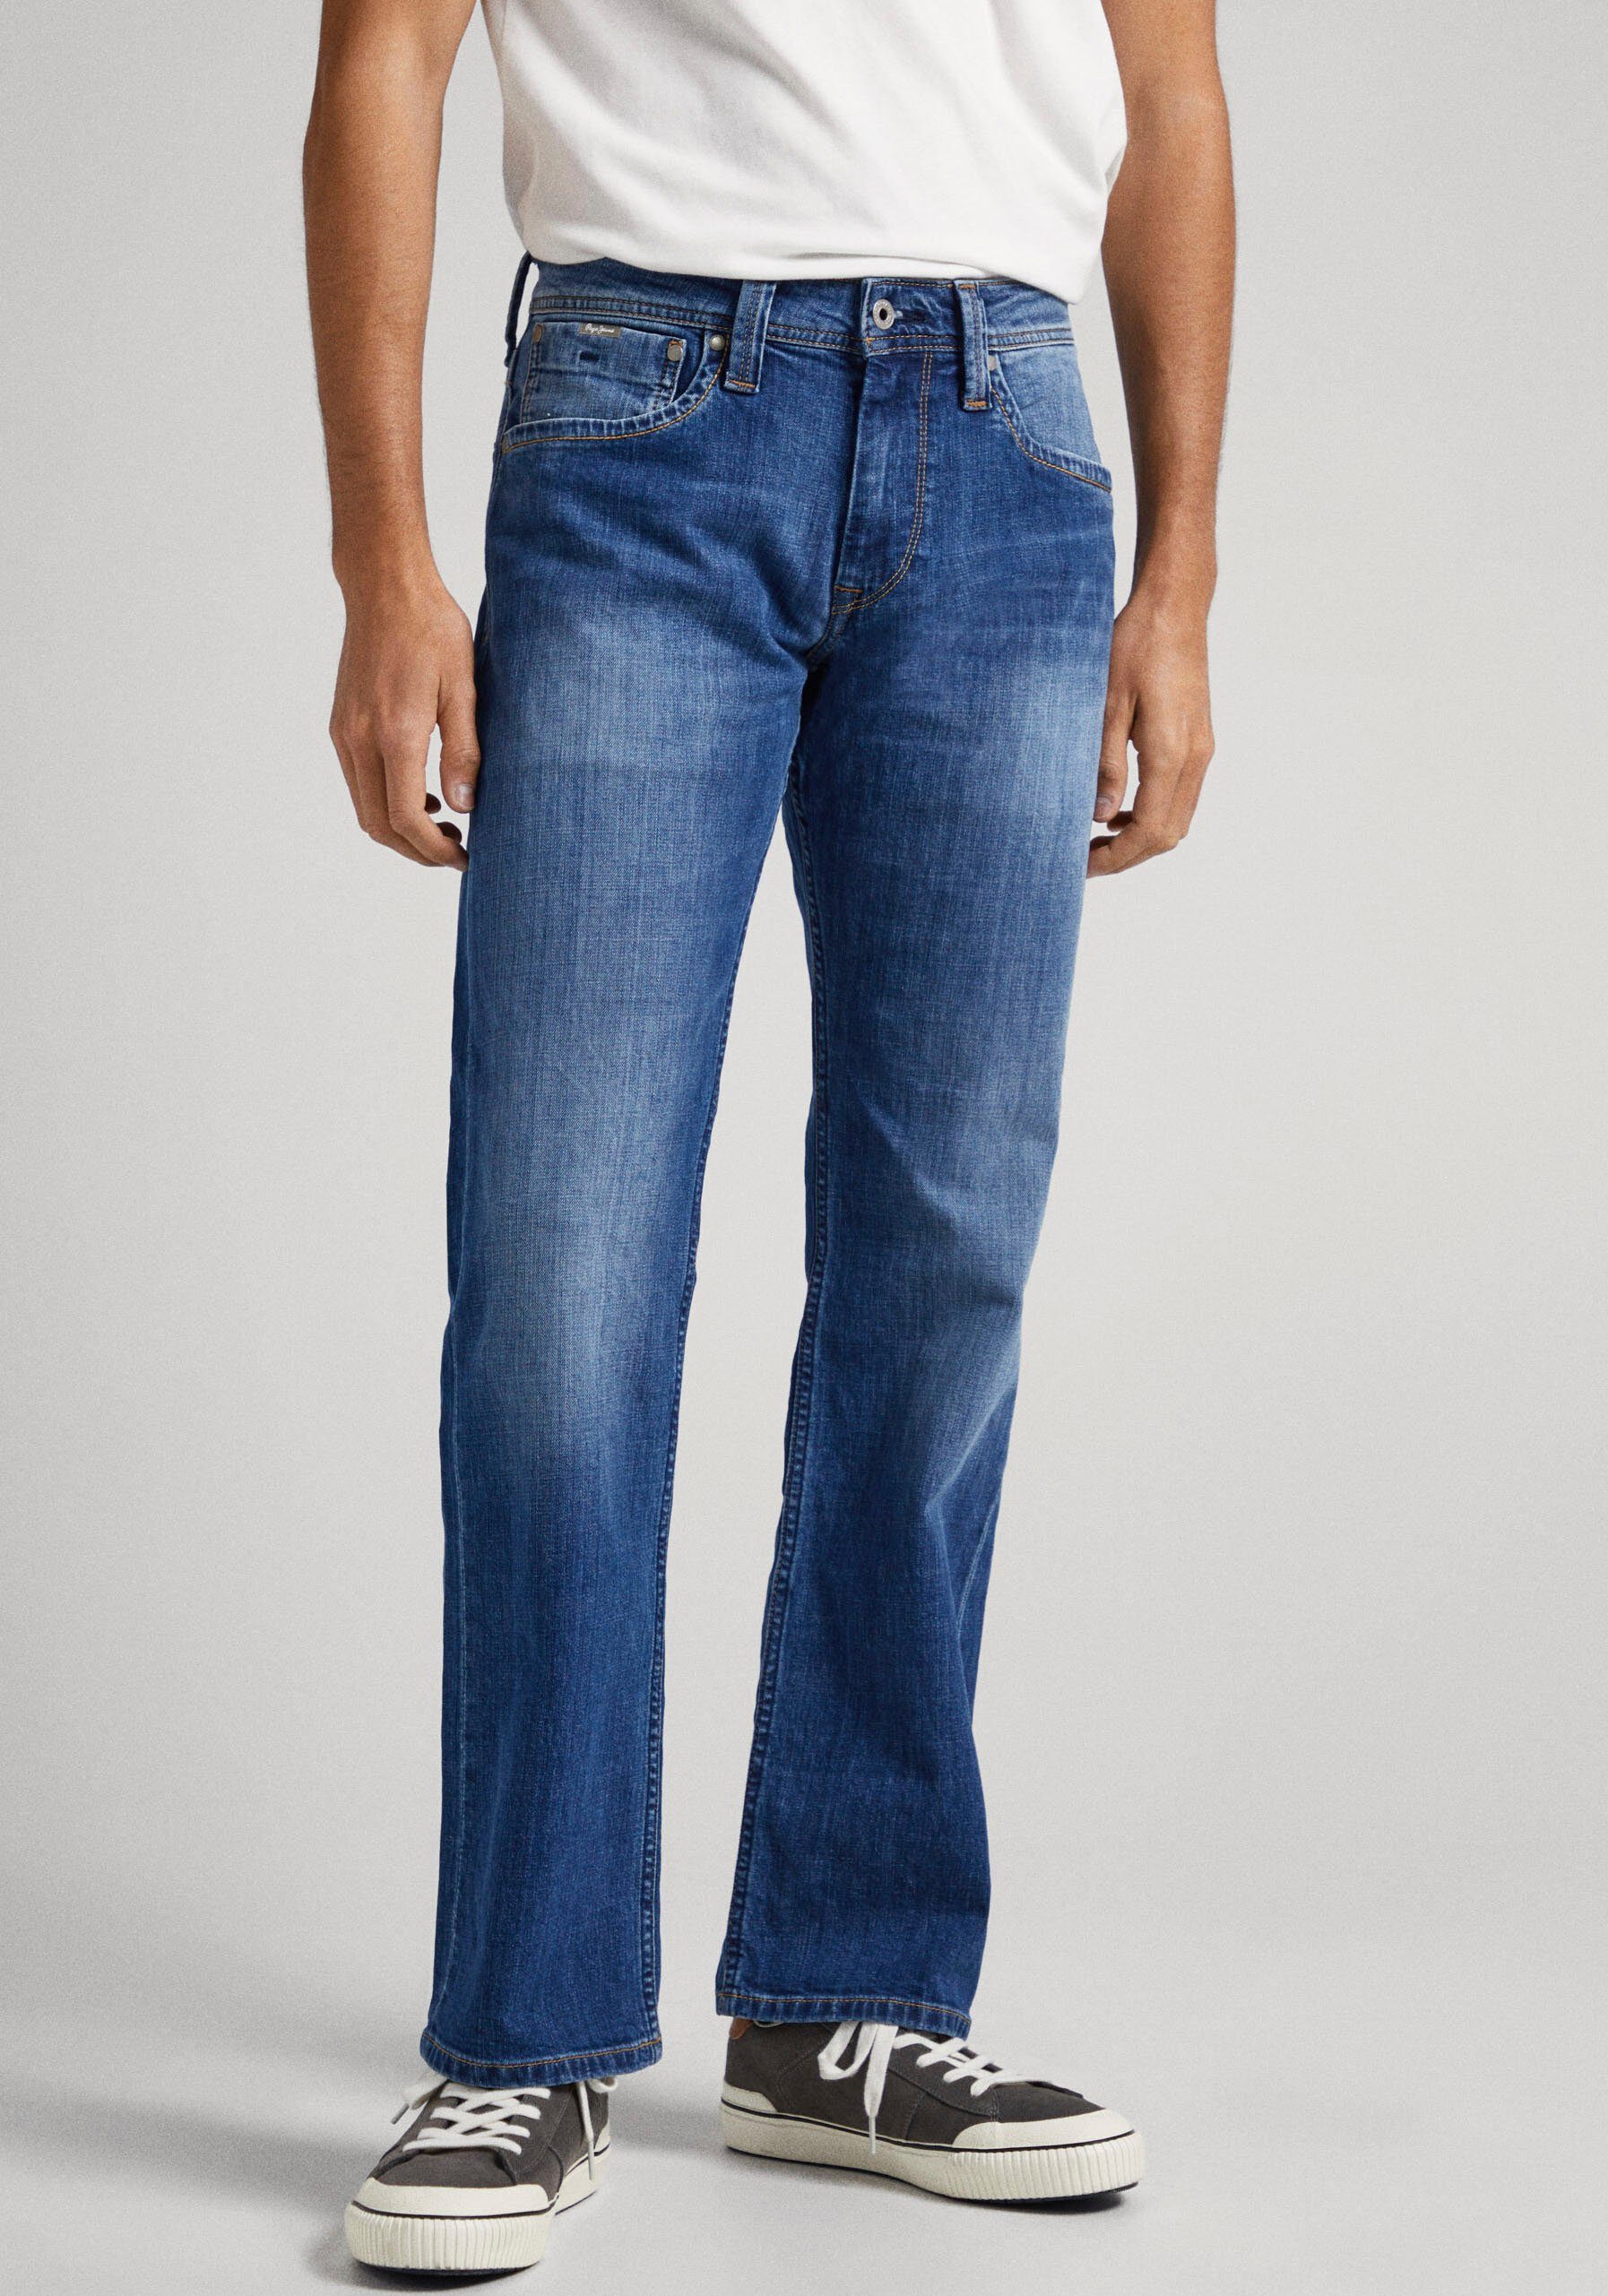 KINGSTON Relax-fit-Jeans ZIP Jeans Pepe